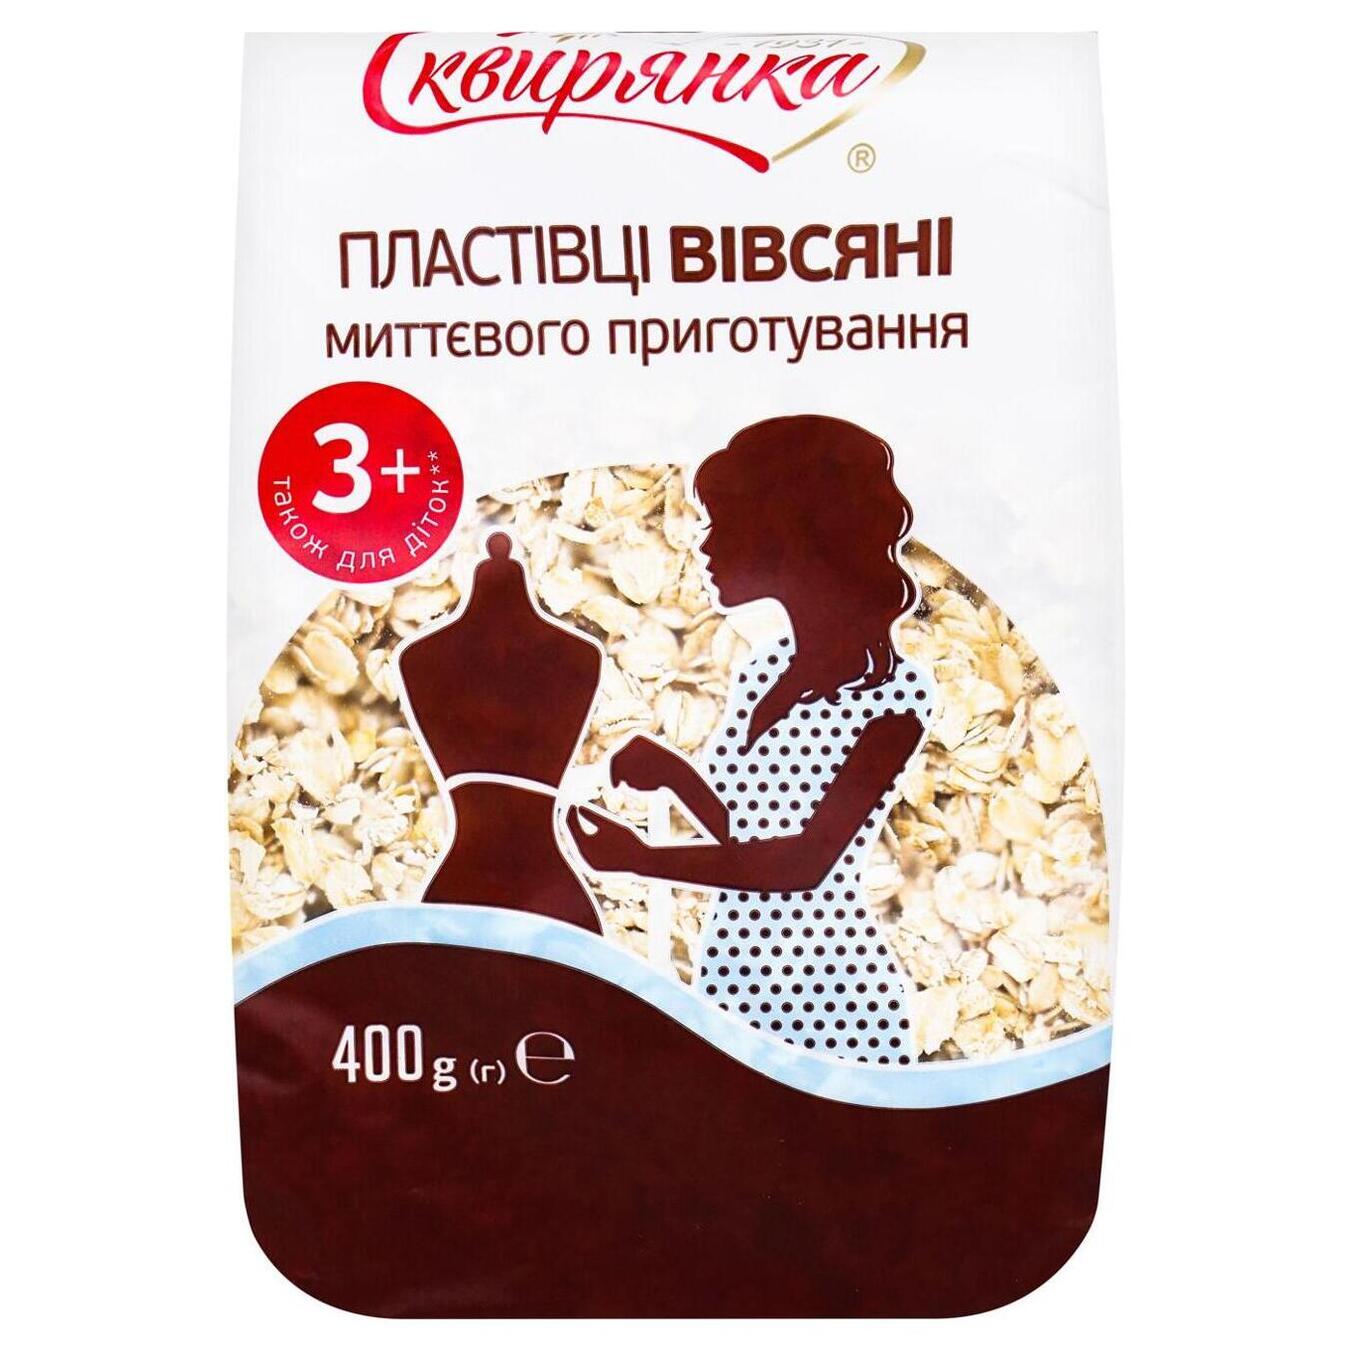 Skvyryanka oat flakes do not require cooking 400g